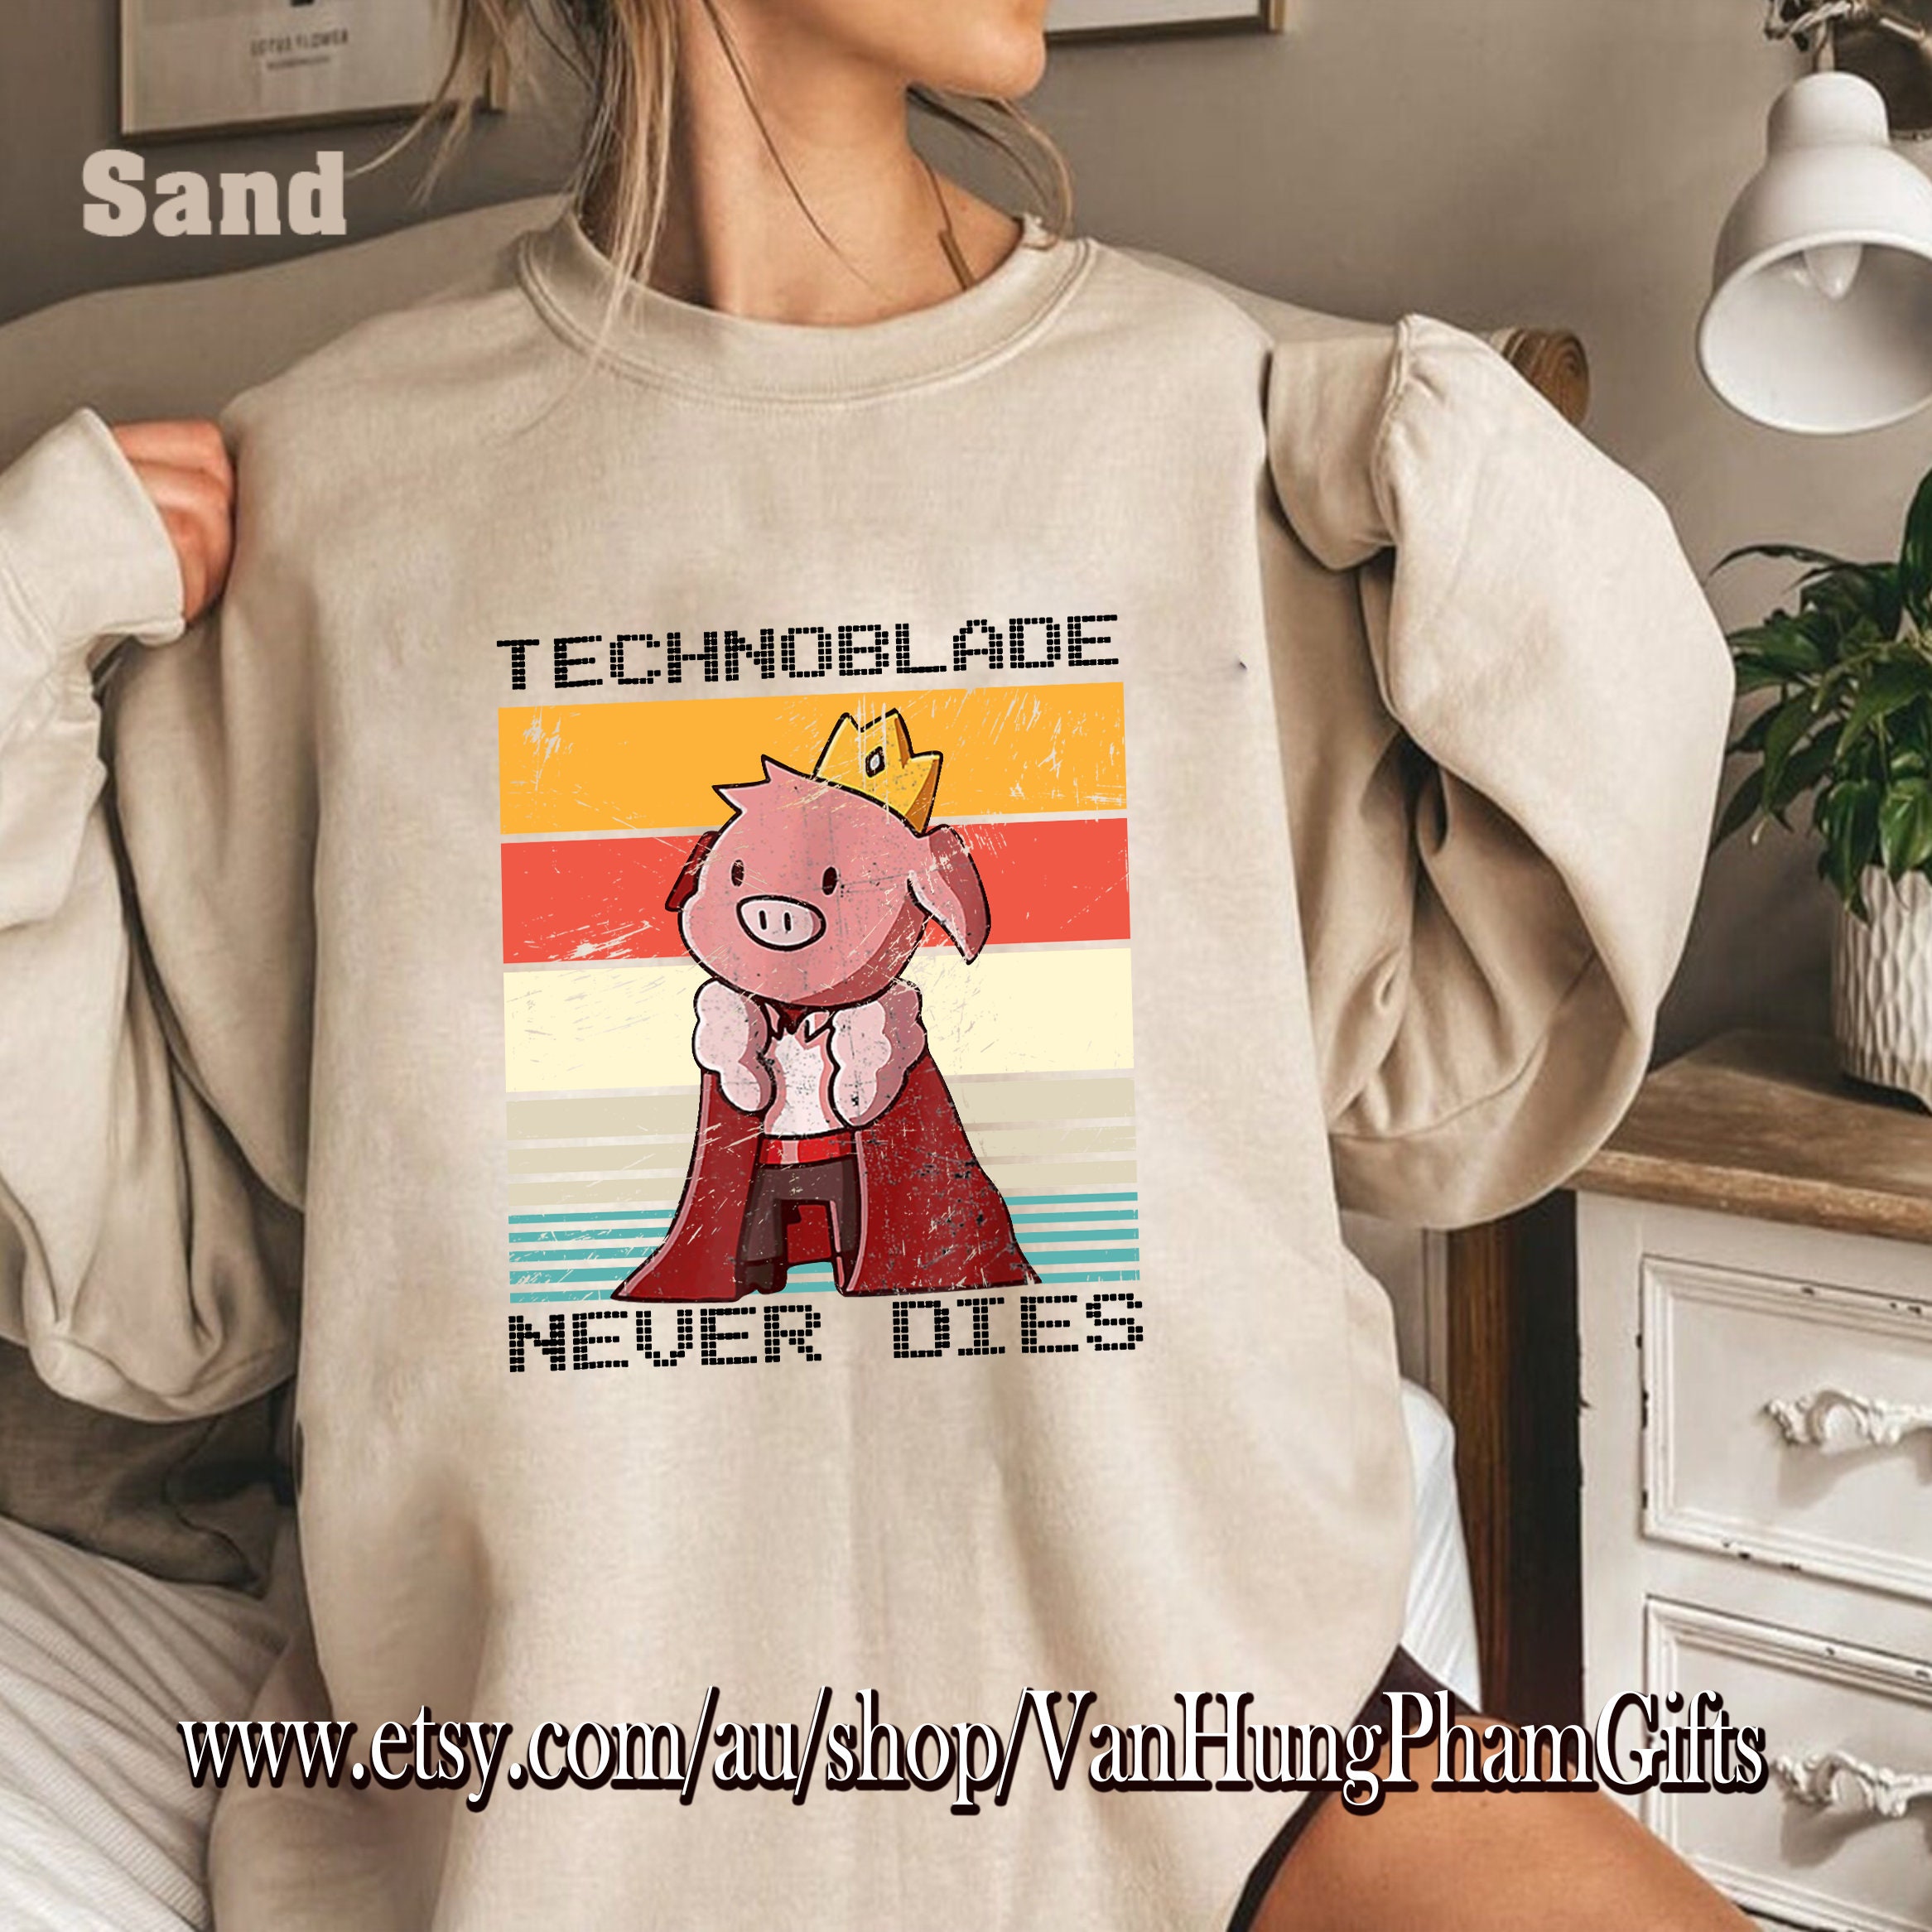 FREE shipping Technoblade never dies sunset vintage shirt, Unisex tee,  hoodie, sweater, v-neck and tank top